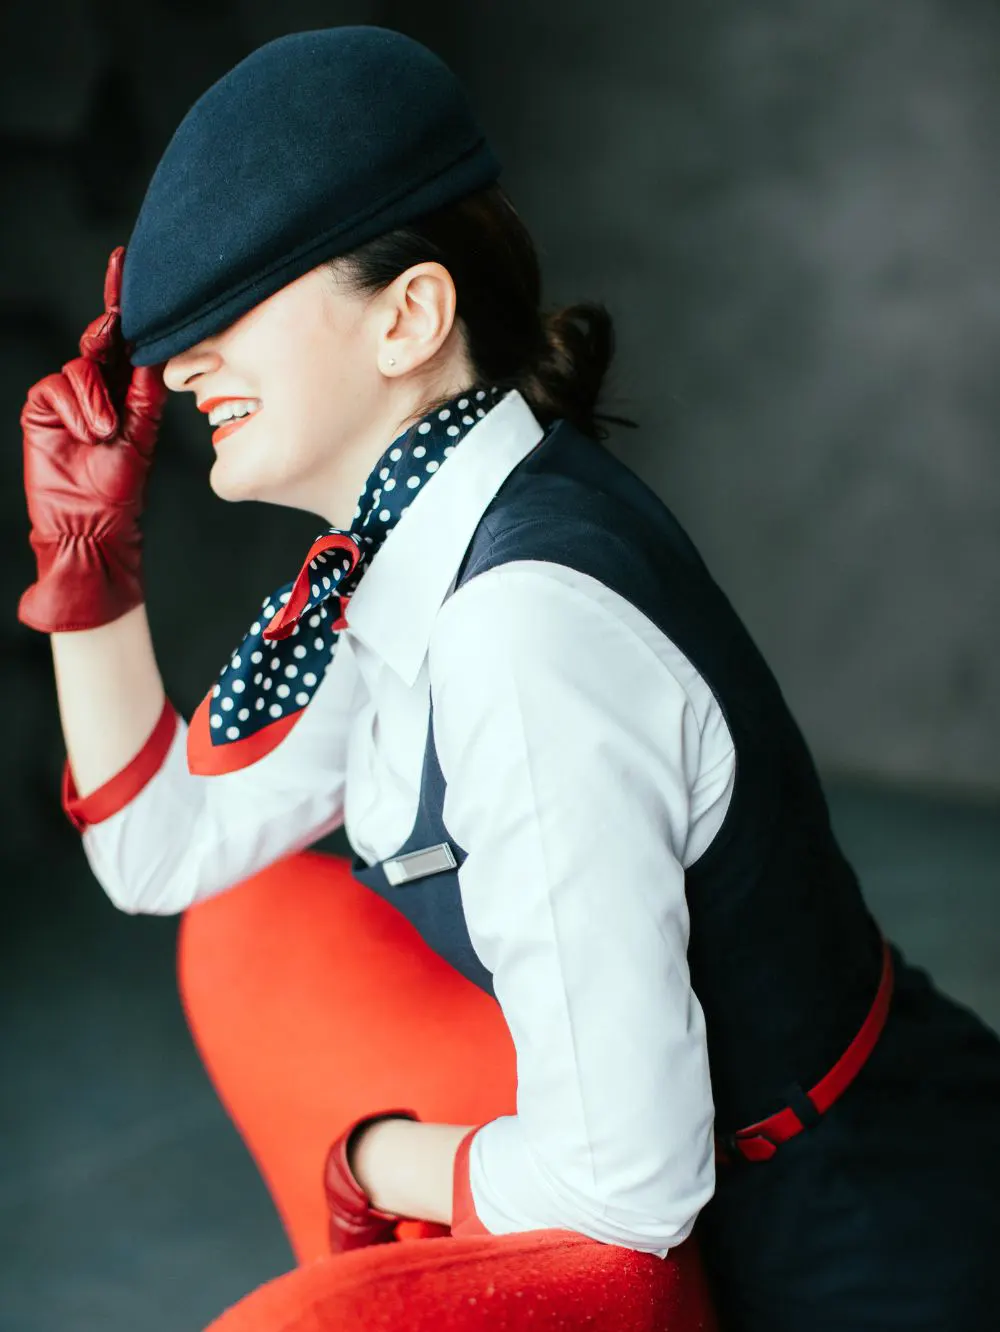 Fashionable woman standing wearing red gloves